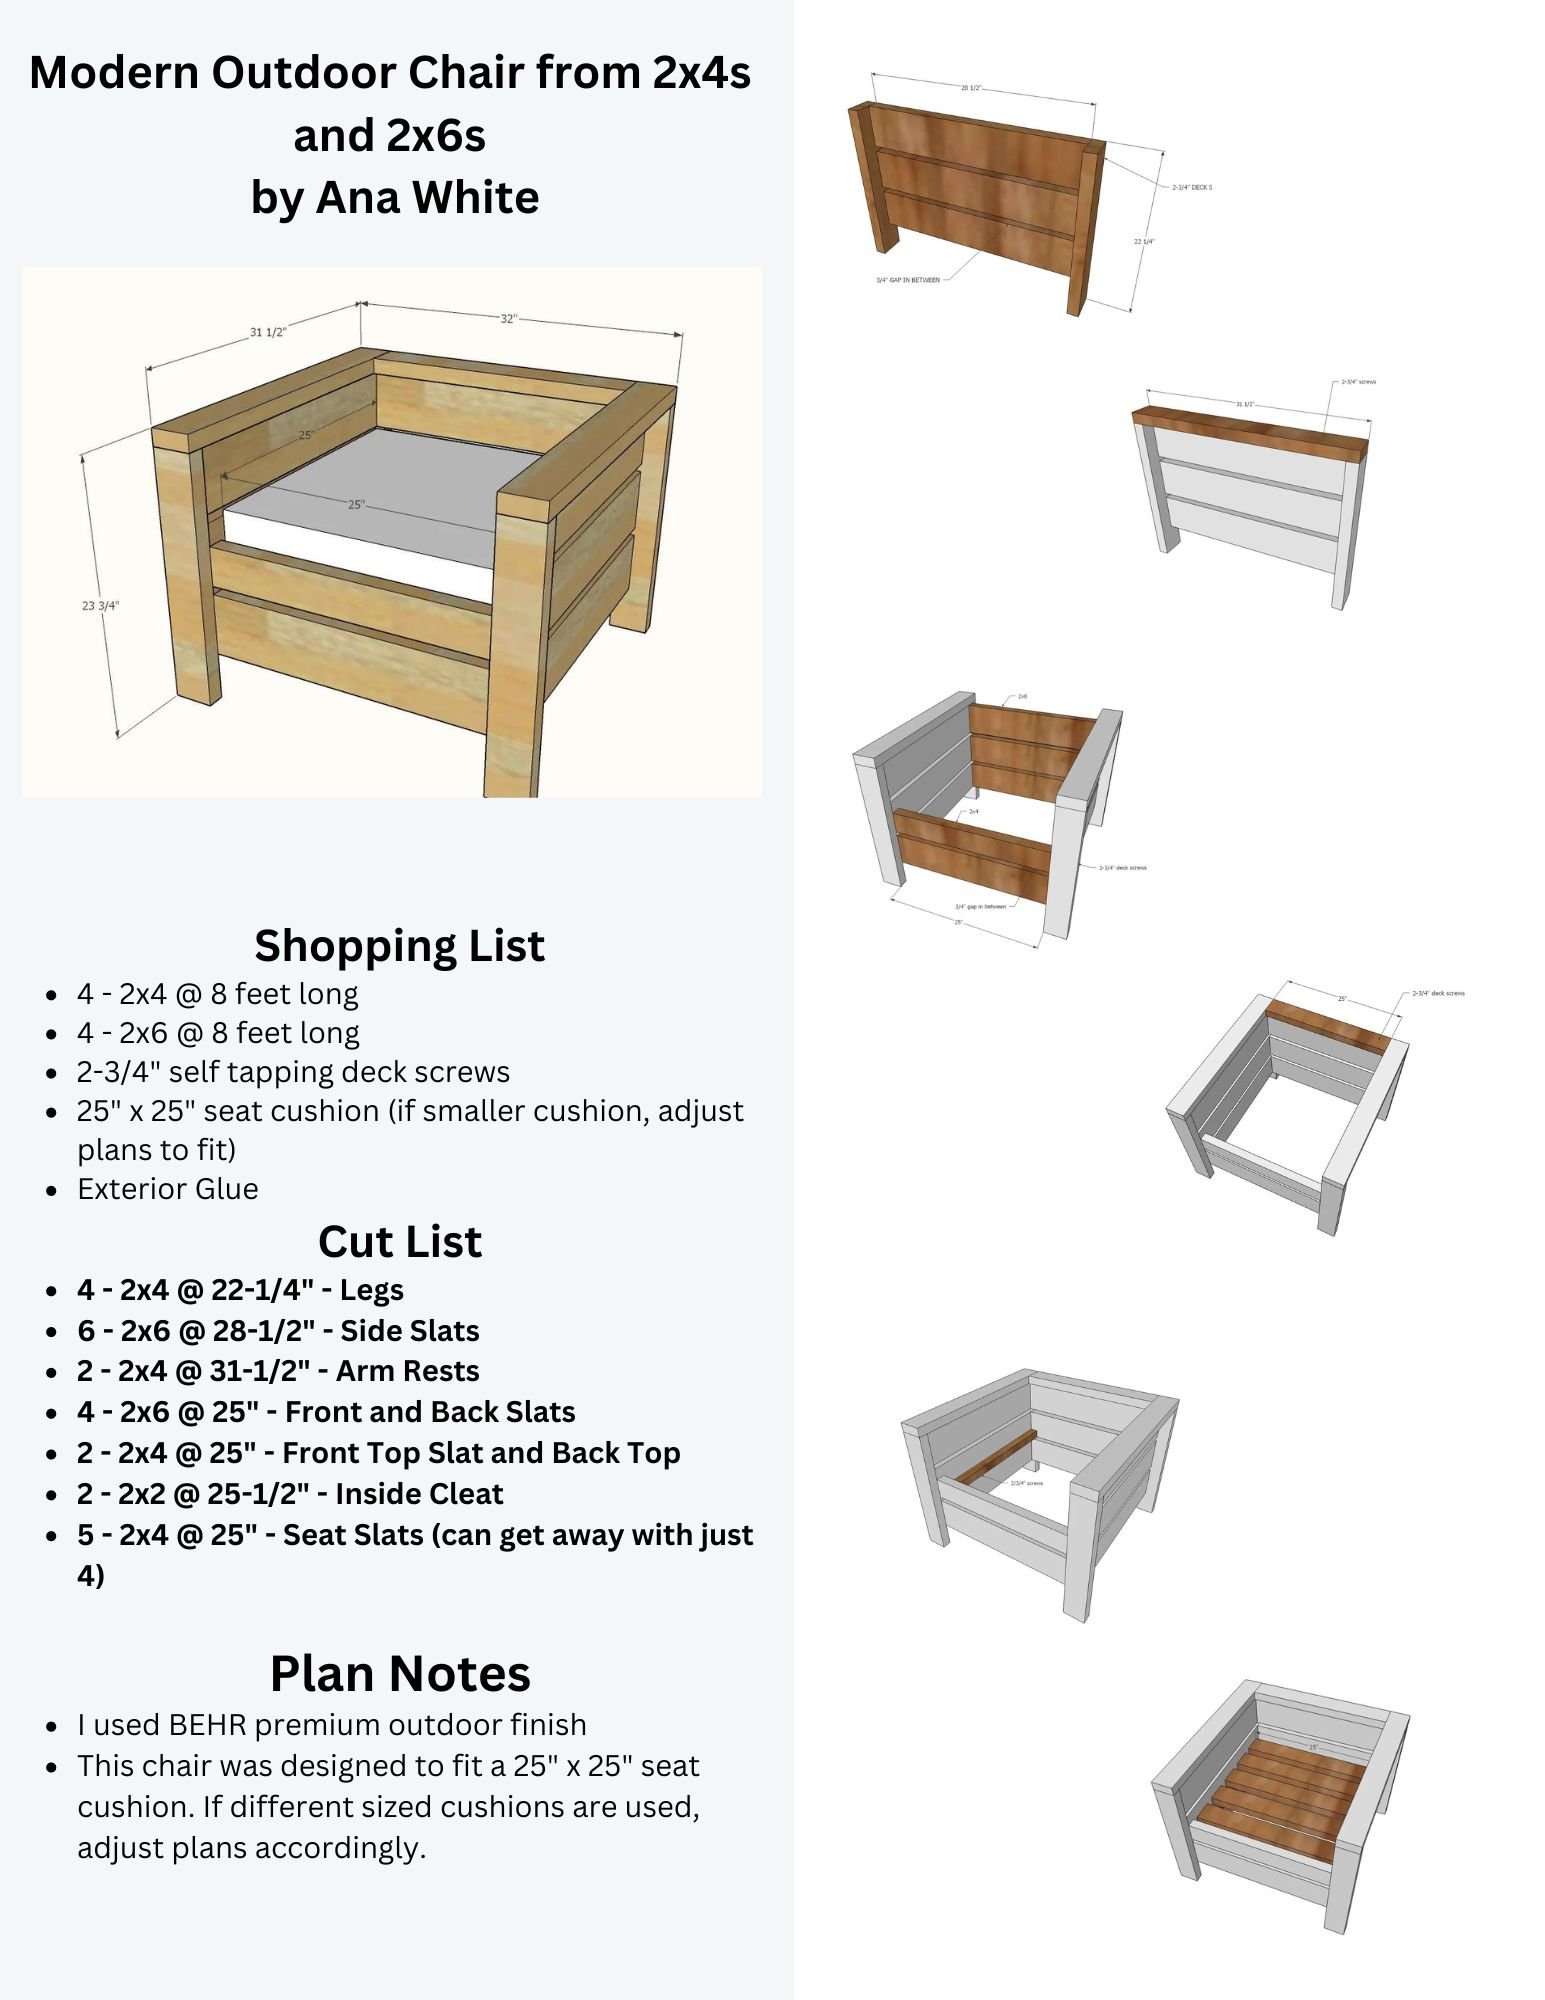 Modern Outdoor Chair from 2x4s and 2x6s Plans